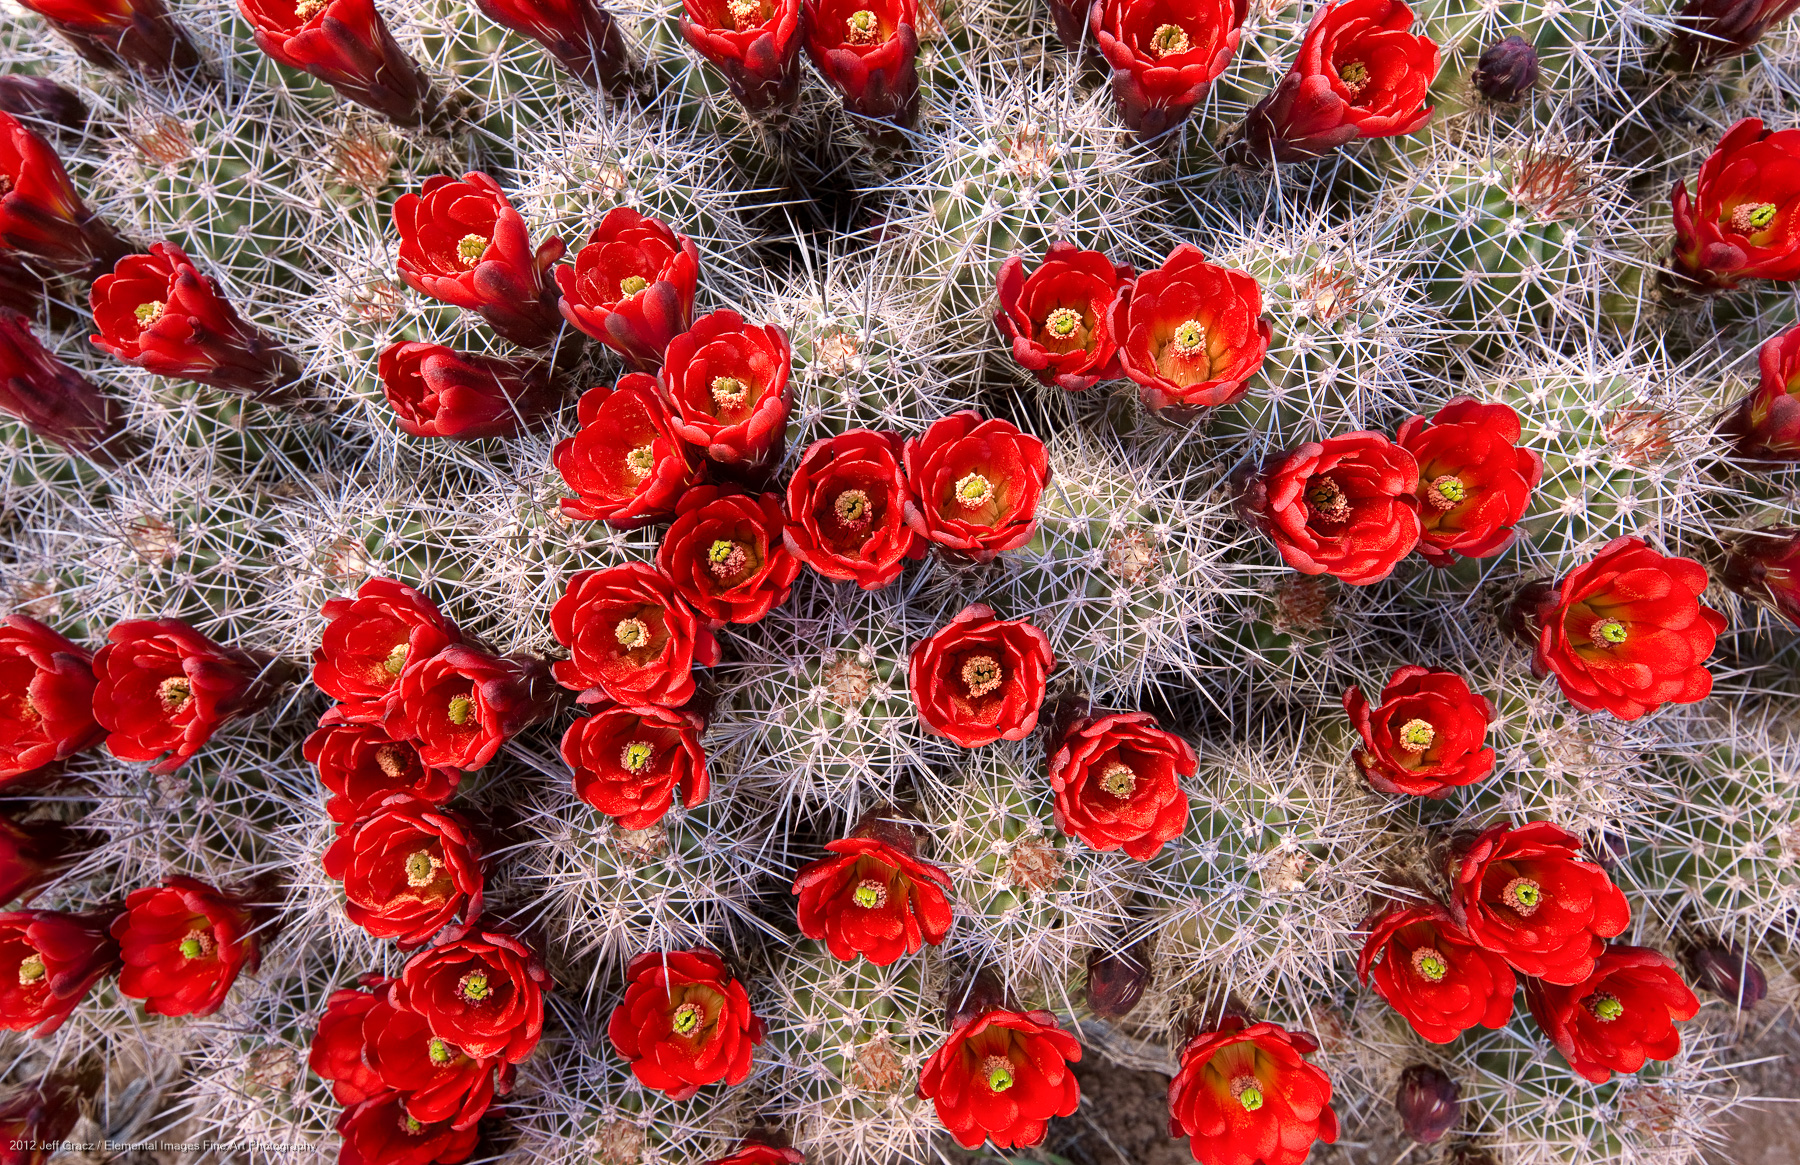 Claret Cup Cactus Blossoms | Canyonlands National Park | UT | USA - © 2012 Jeff Gracz / Elemental Images Fine Art Photography - All Rights Reserved Worldwide